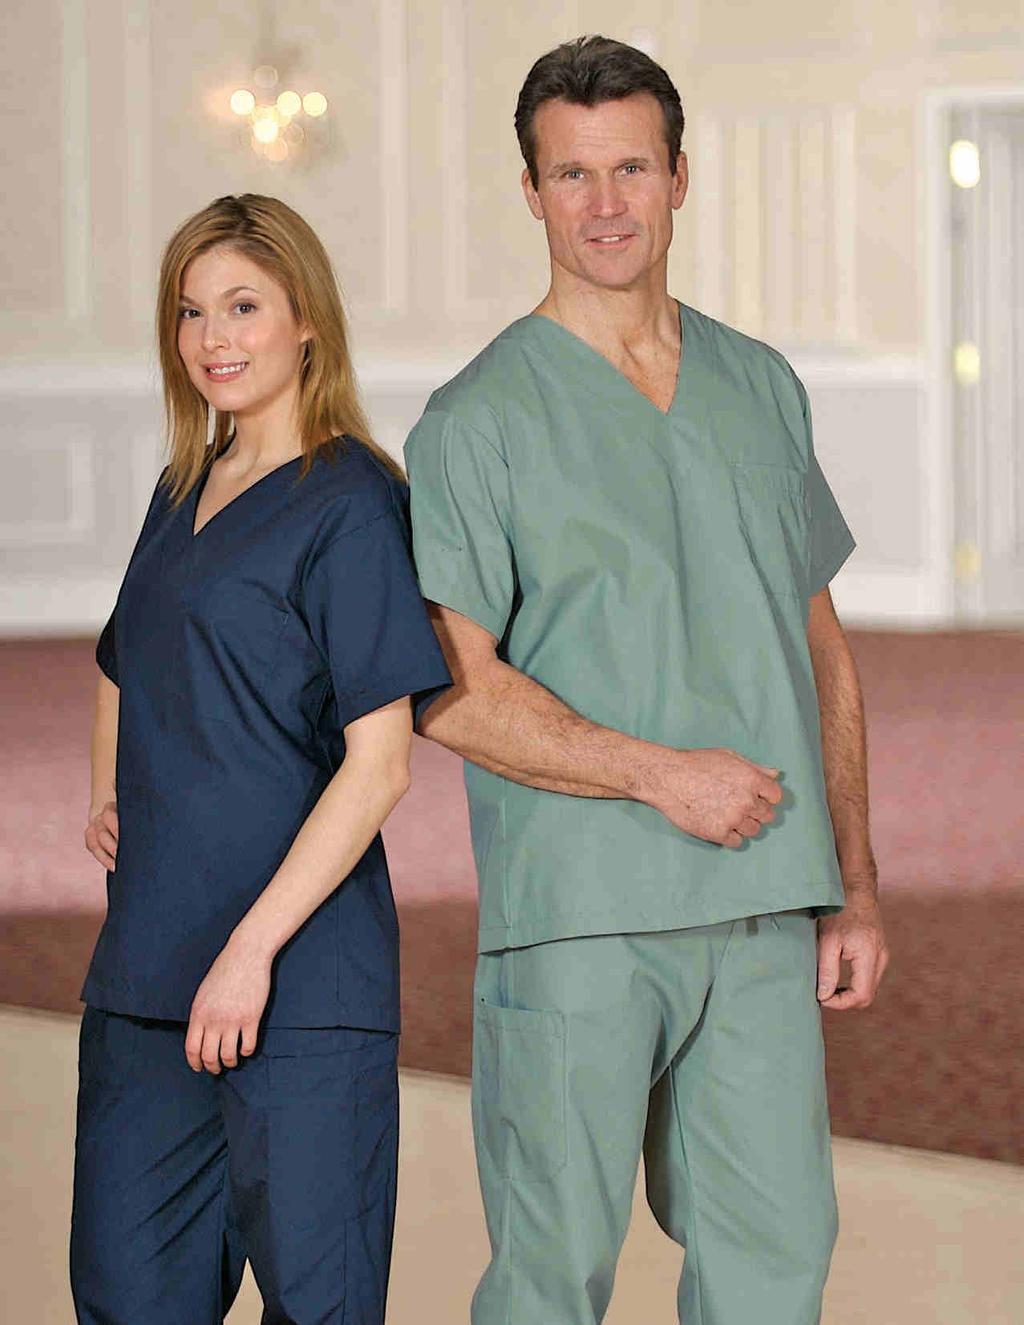 HEALTH CARE WEAR 2575 (set) 2575 (set) Cargo scrubs set With two lower-side cargo-type pockets, two deep diagonal pockets,